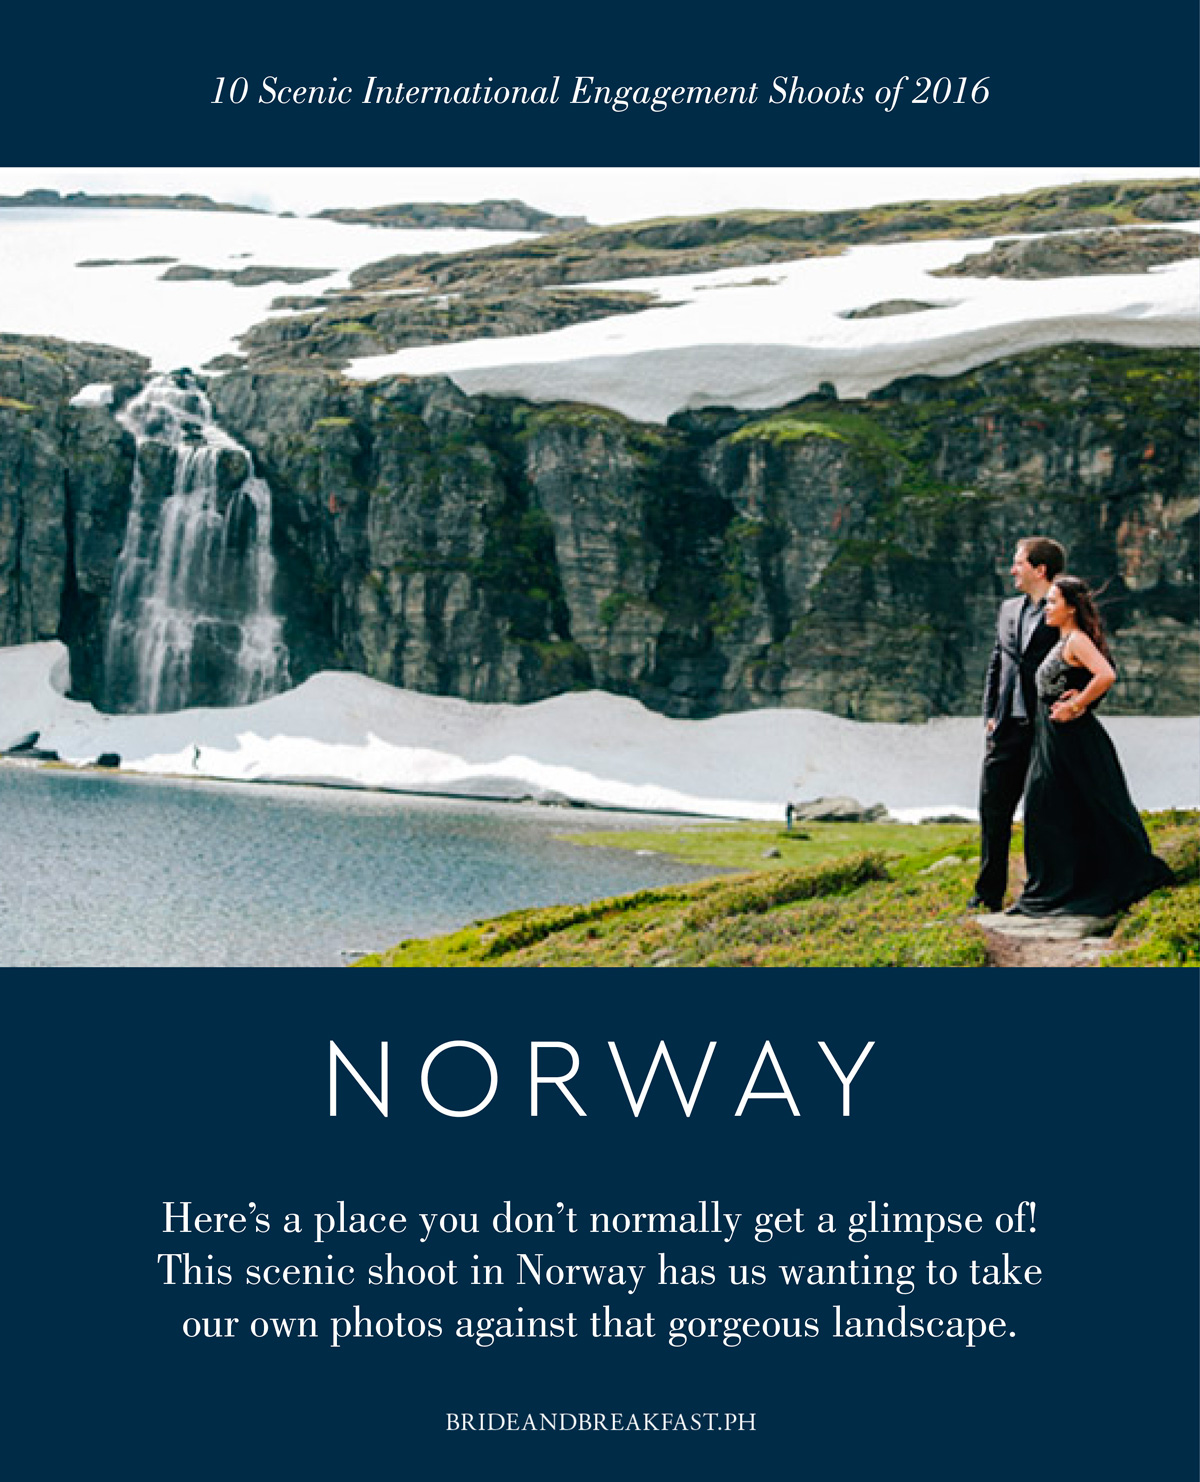 6. Norway Here's a place you don't normally get a glimpse of! This scenic shoot in Norway has us wanting to take our own photos against that gorgeous landscape.